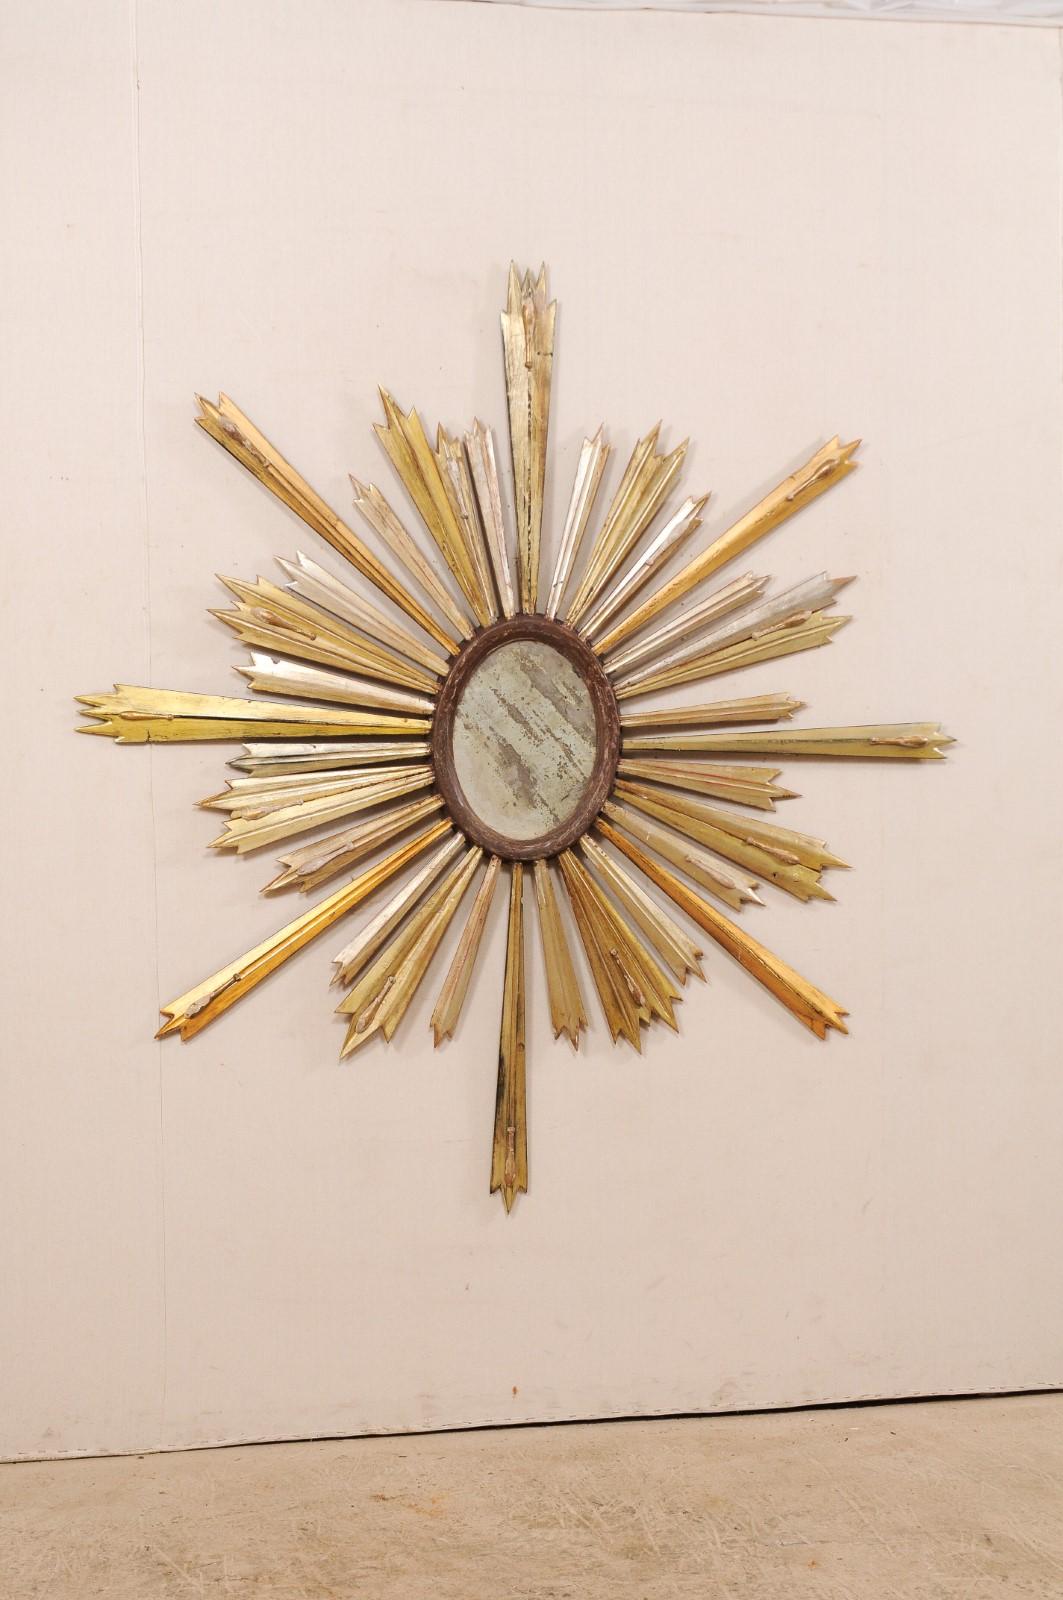 An Italian gilded wood sunburst with mirrored center from the 19th century. This antique wall decoration from Italy features an oval-shaped central mirror within a wooden surround, from which gilded rays extend outward in various lengths resulting